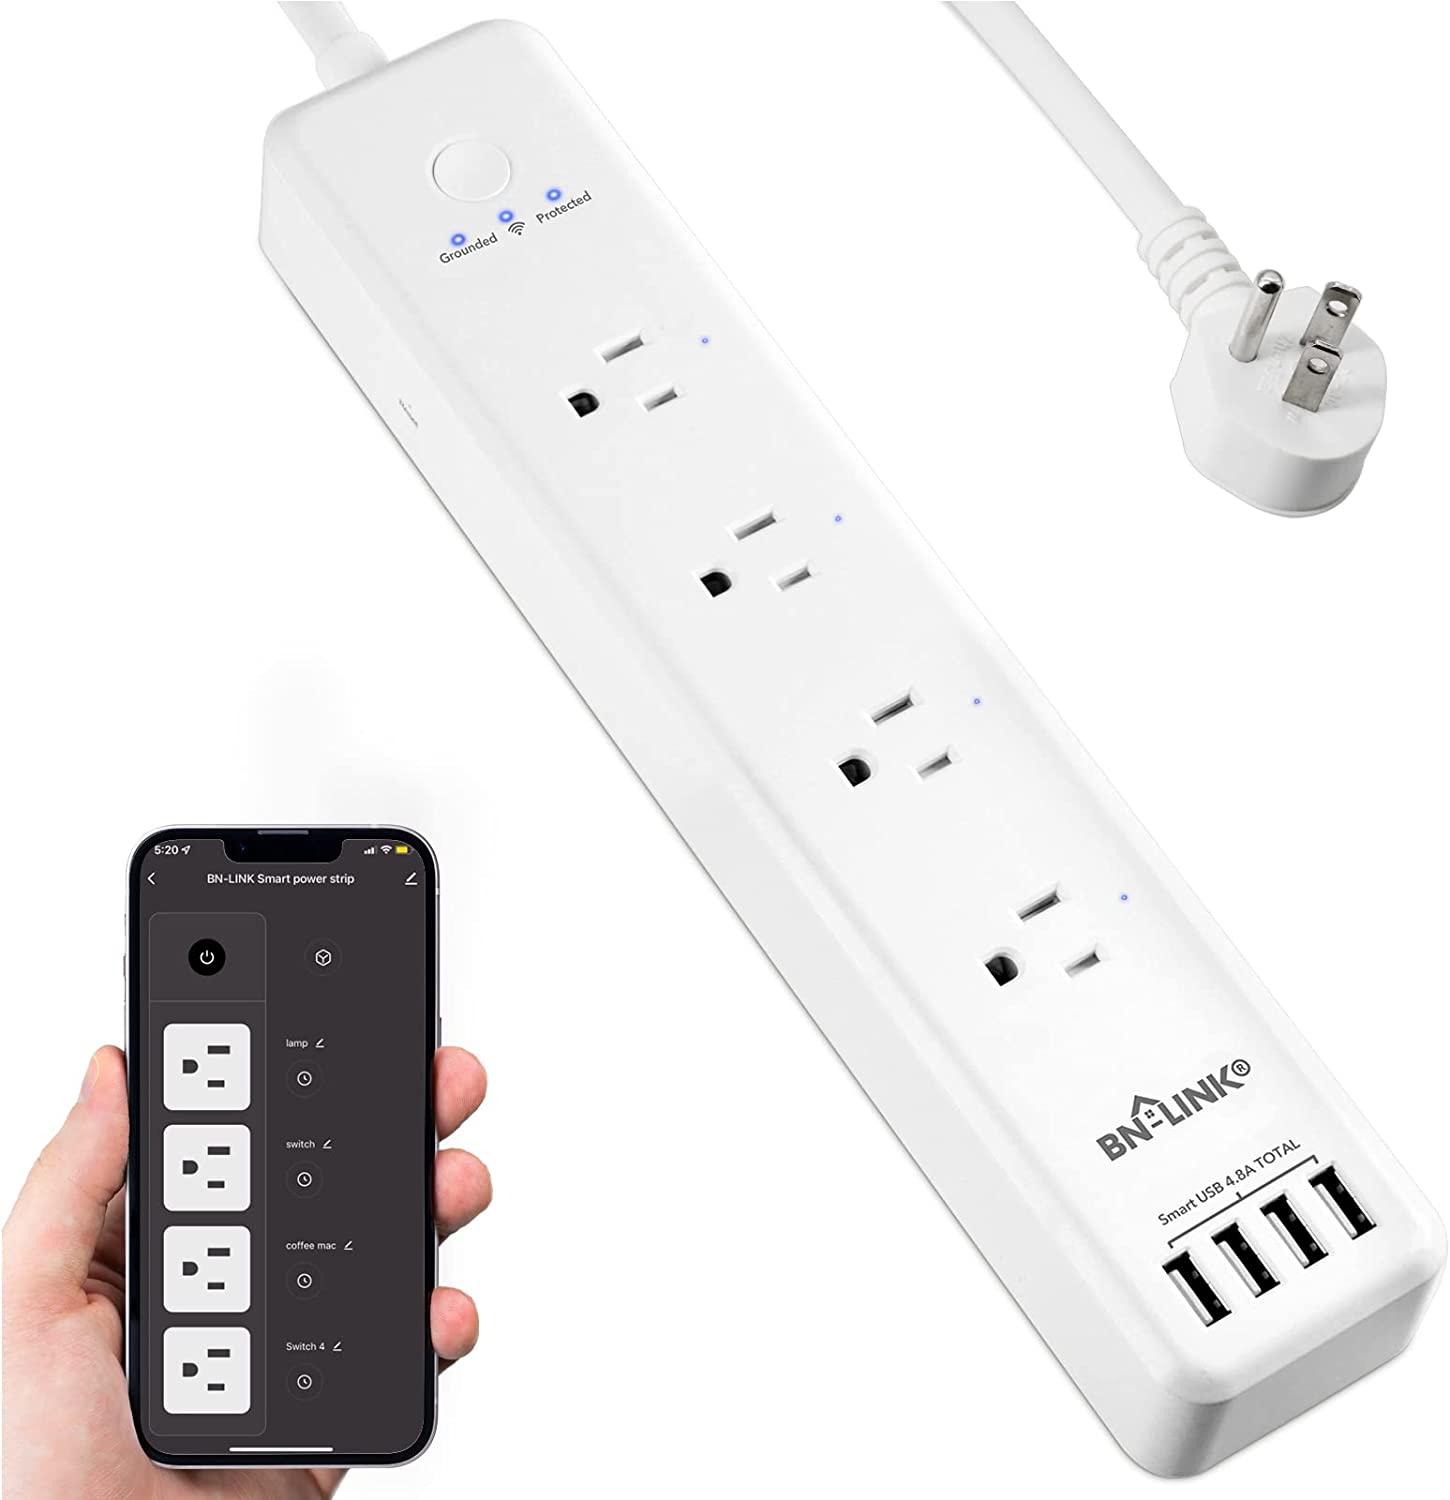 Marketing photo for the BN-Link power strip